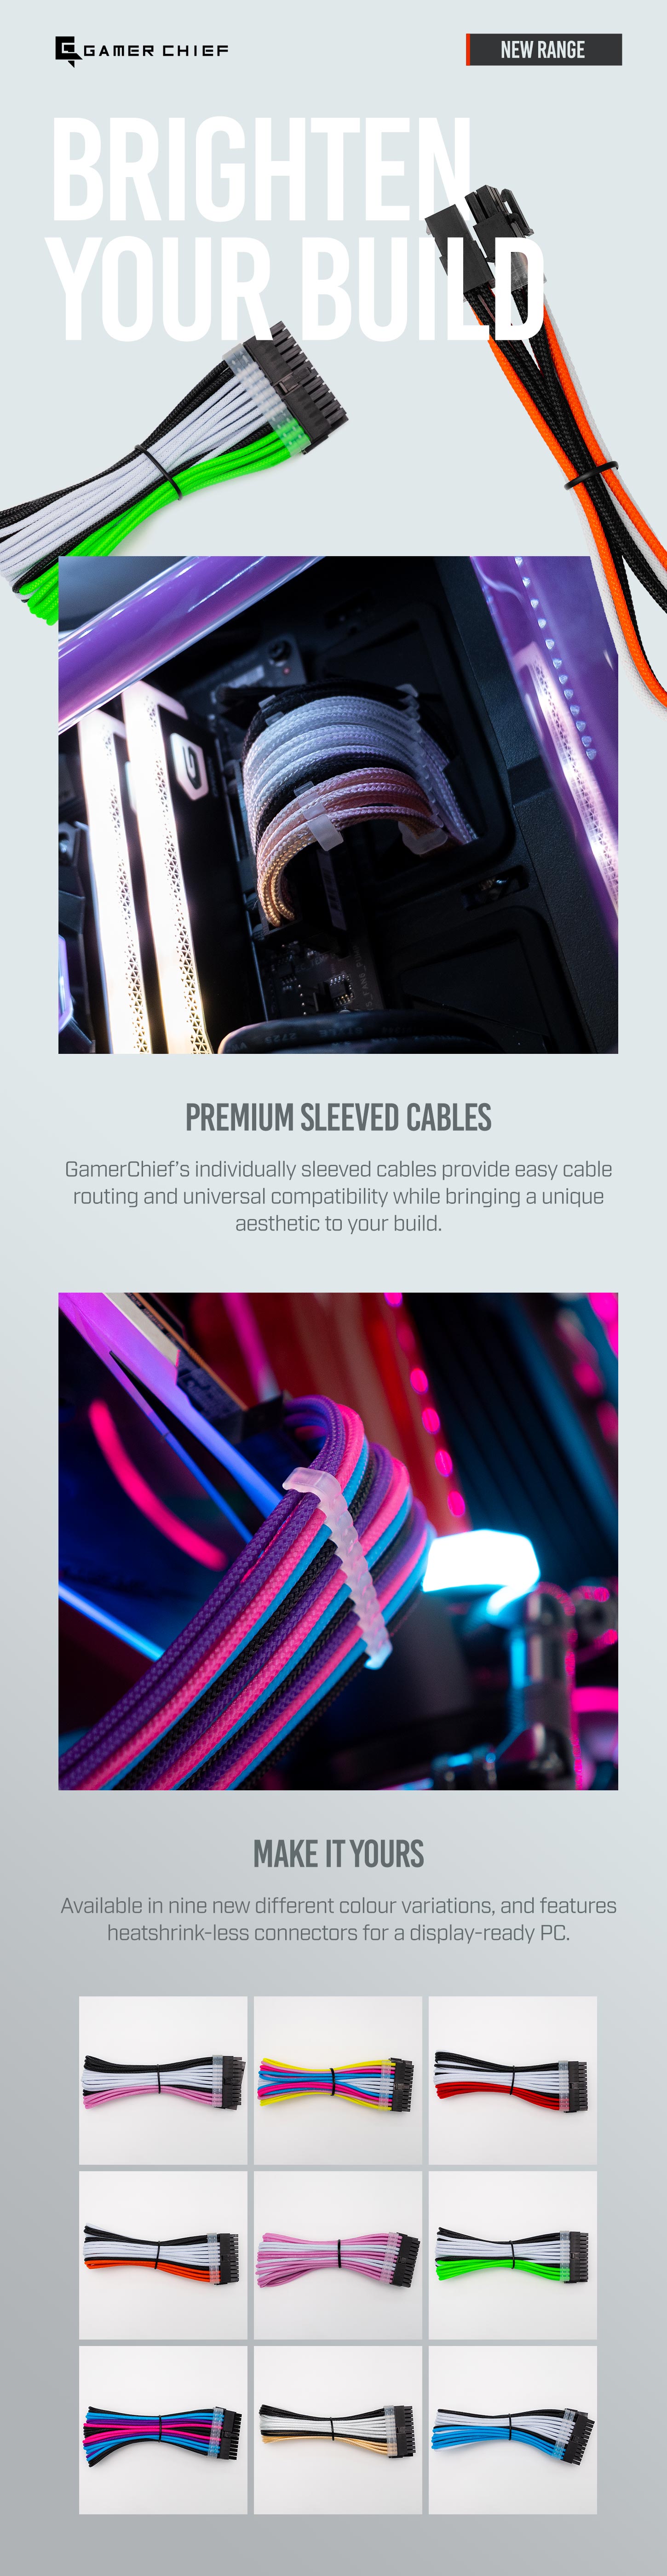 A large marketing image providing additional information about the product GamerChief Elite Series 6-Pin PCIe 30cm Sleeved Extension Cable (Blue/White/Black) - Additional alt info not provided